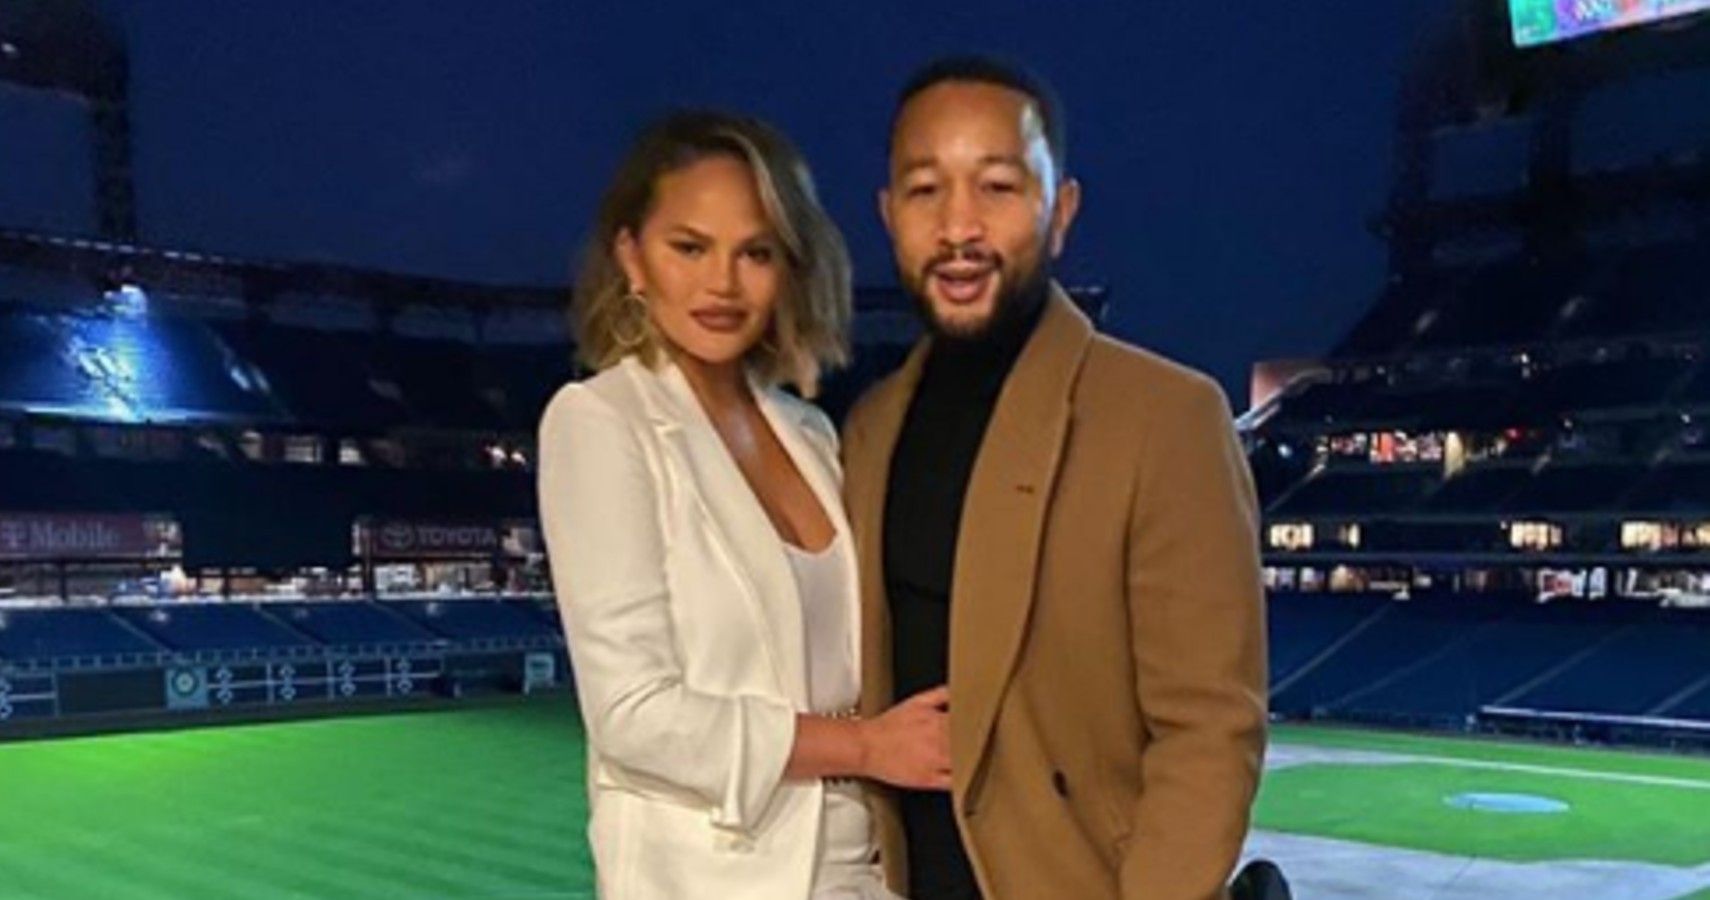 John Legend On Pregnancy Loss: 'We Hold On To What Makes Us Optimistic'